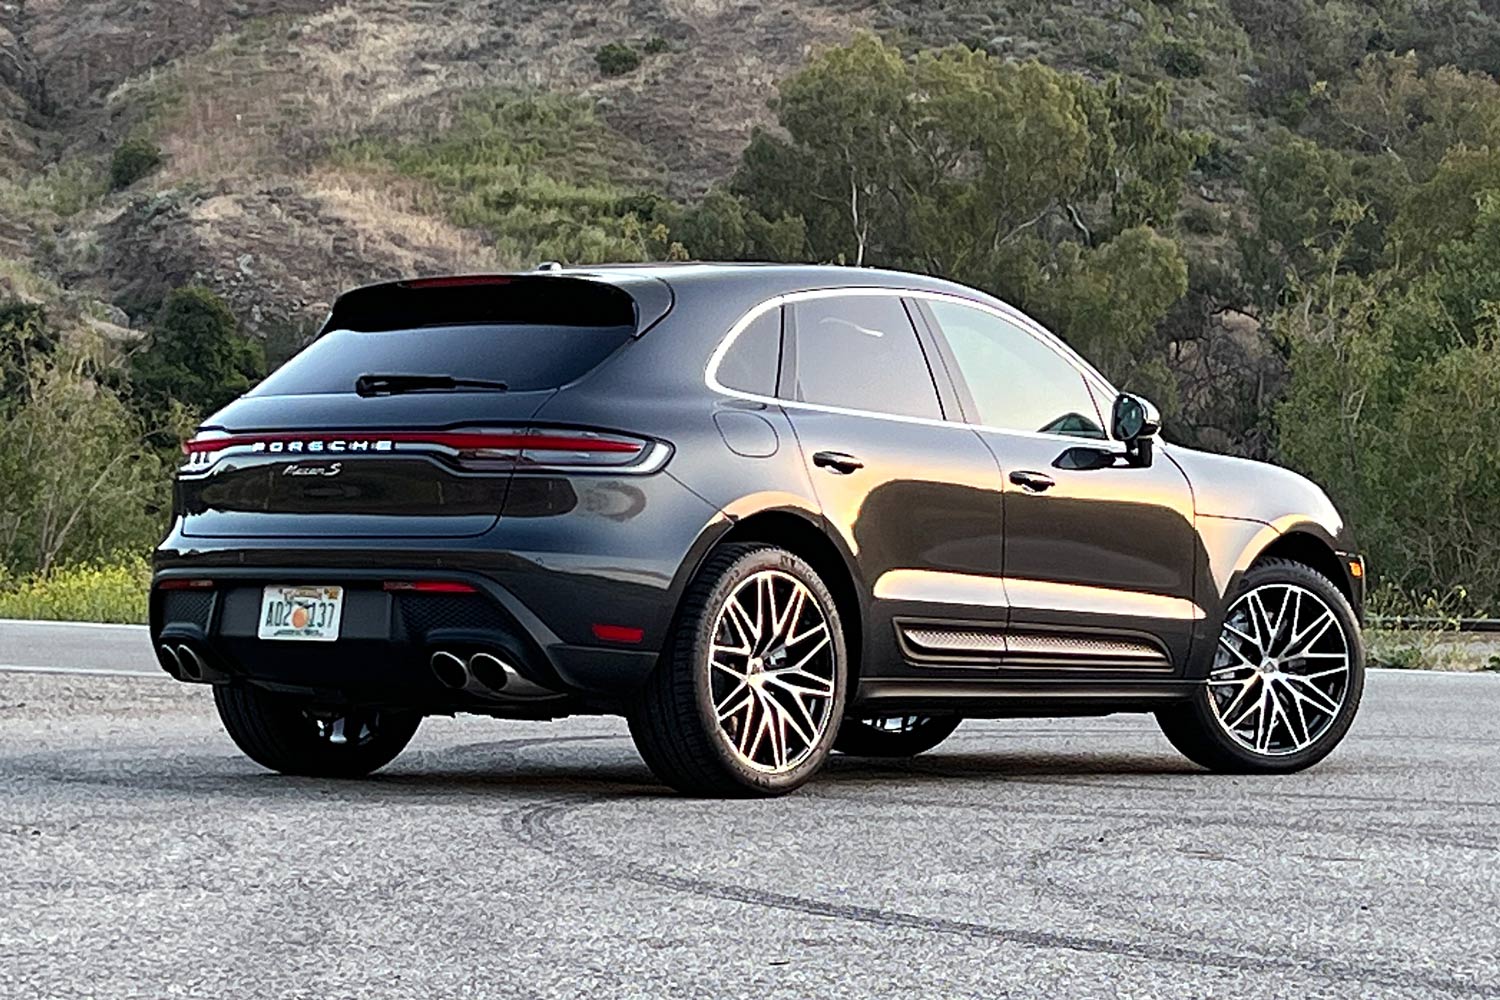 2022 Porsche Macan first drive review: Turbo-four is hardly a bore - CNET